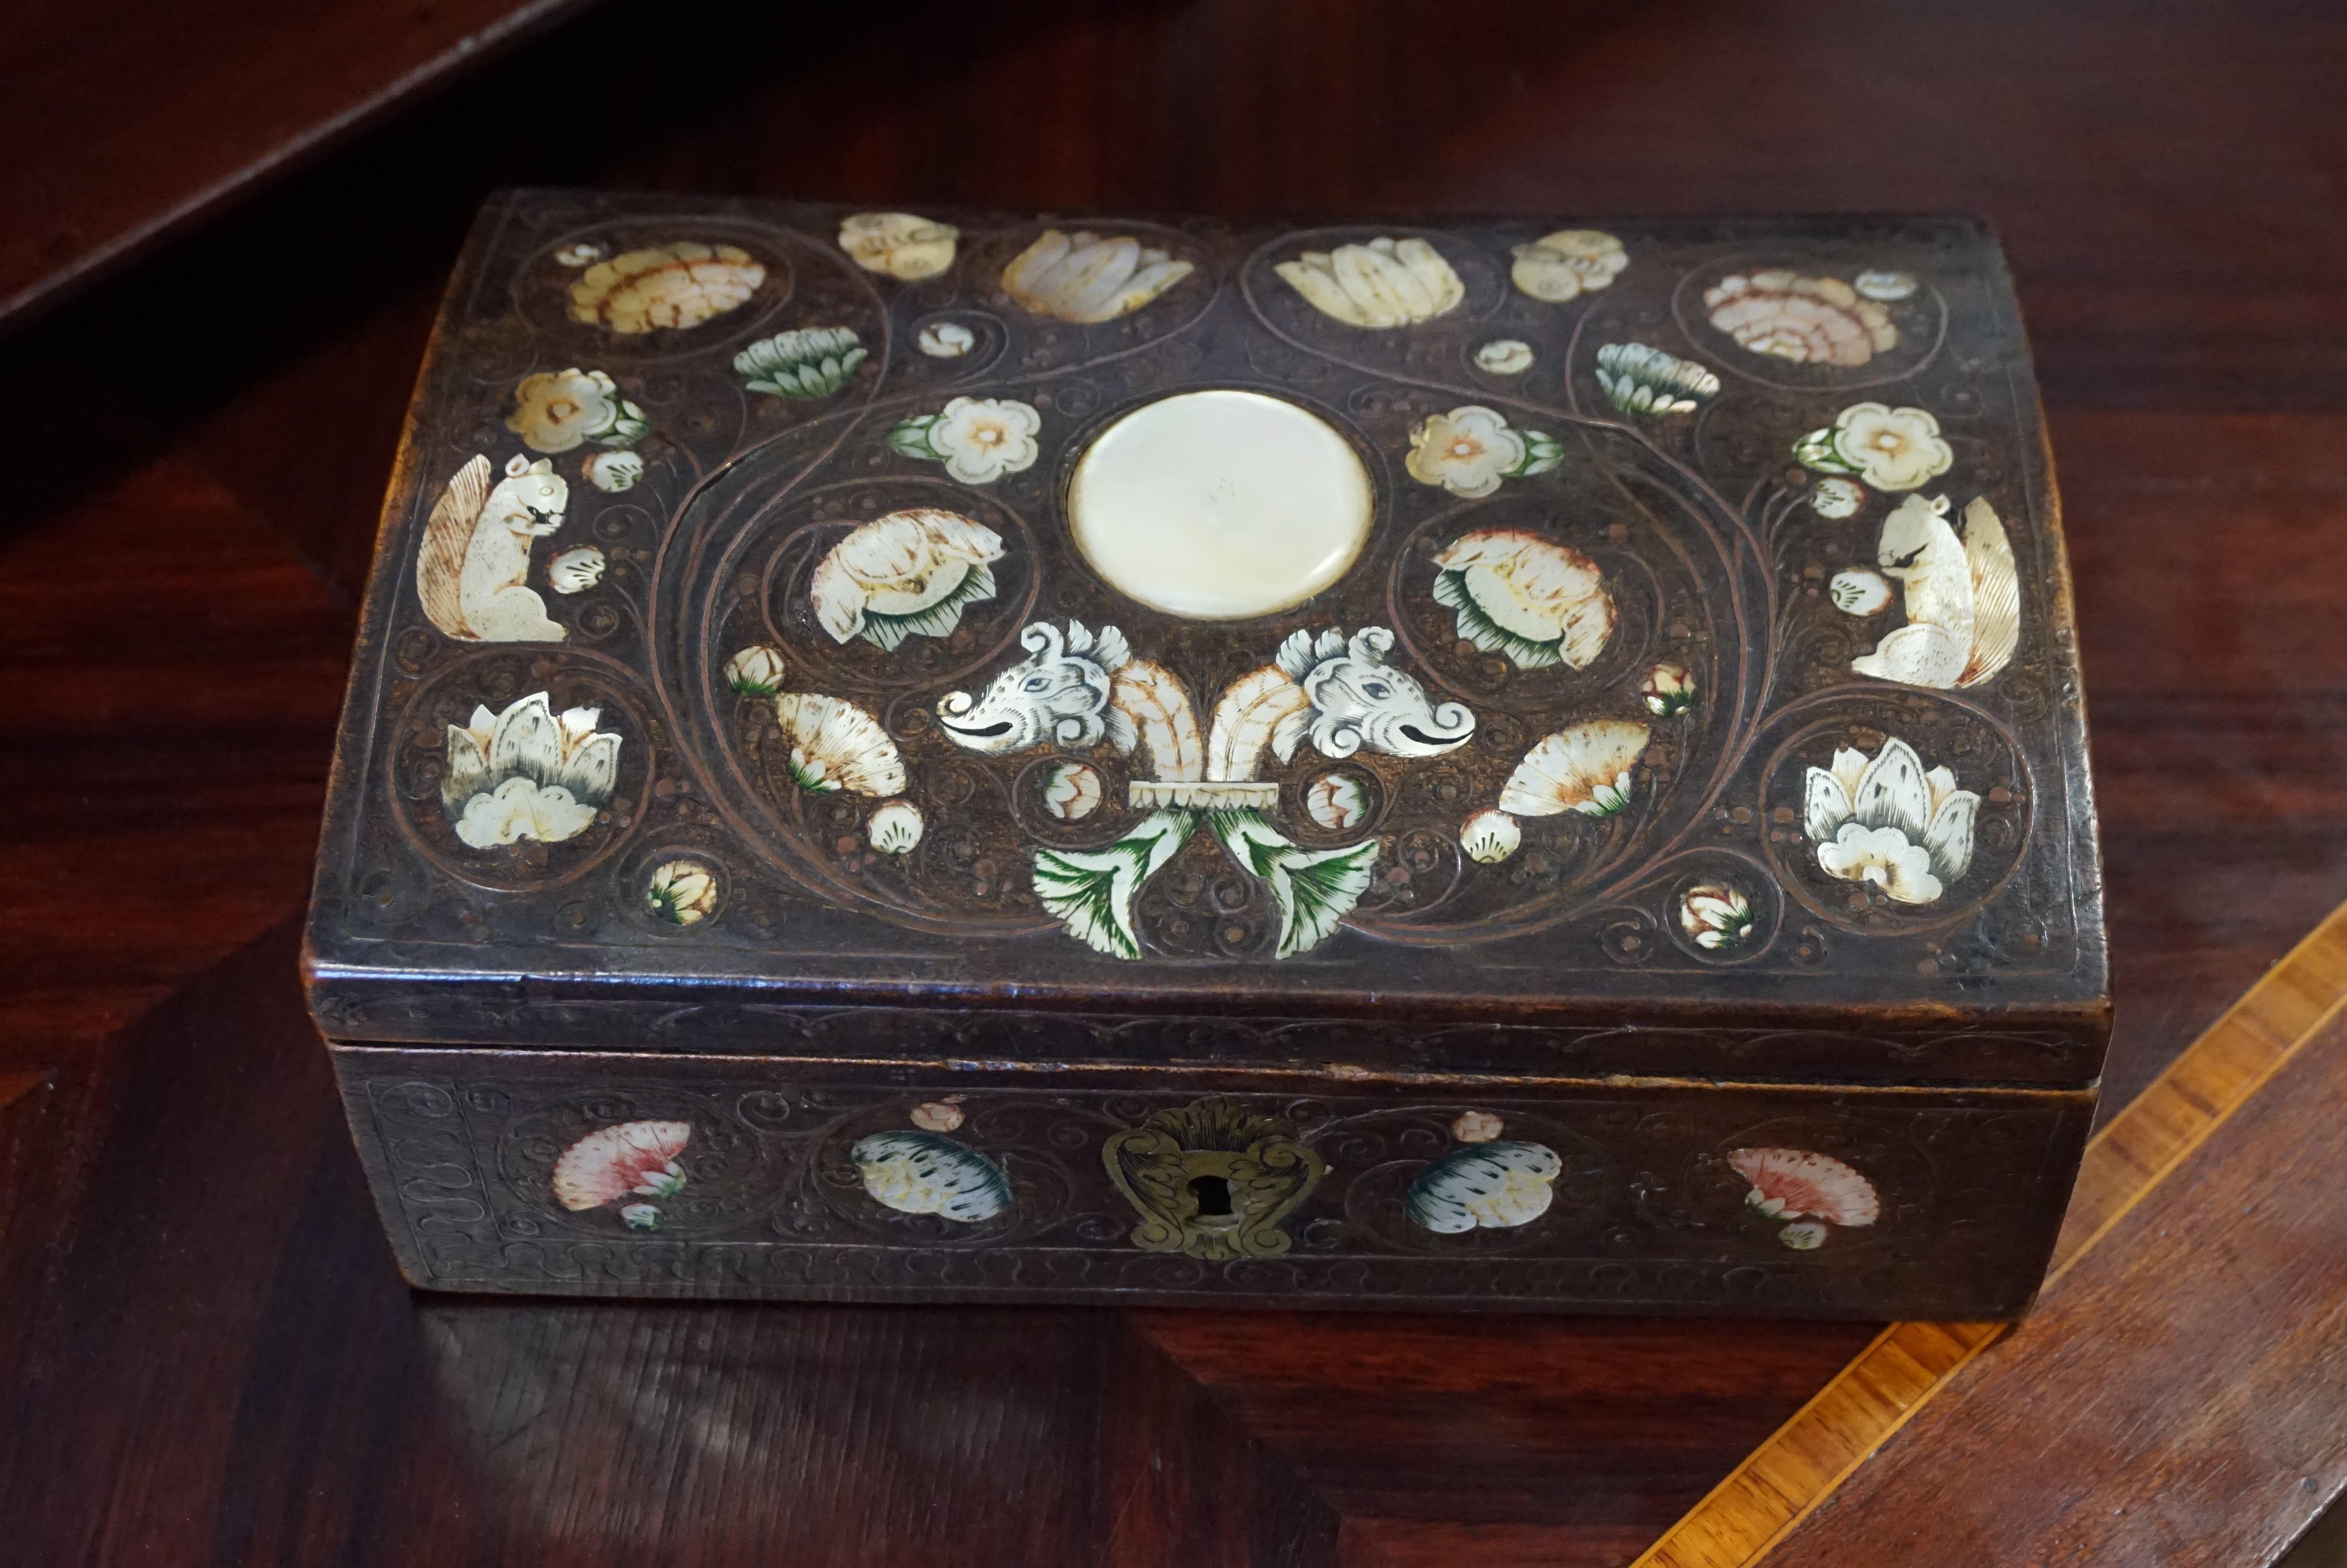 Incredible workmanship and highly collectible antique box, late 1600s.

When it comes to collectible and high value boxes, this little gem from the 1680s is right up there with the rarest and most beautiful ever made. In the late 1600s the city of